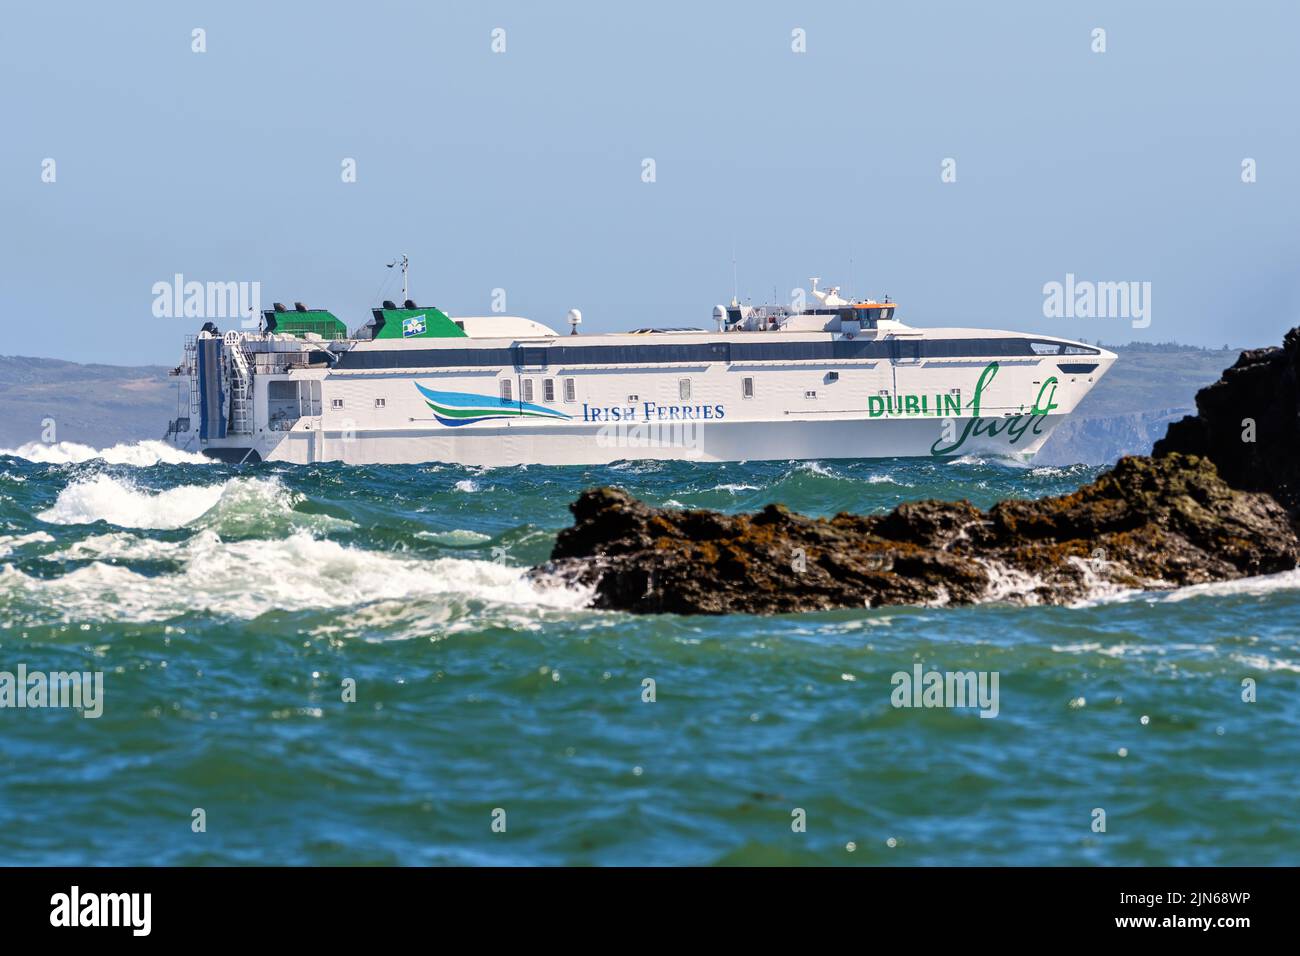 The Irish Ferries high-speed catamaran Dublin Swift arriving Holyhead after a crossing from Dublin - May 2022. Stock Photo